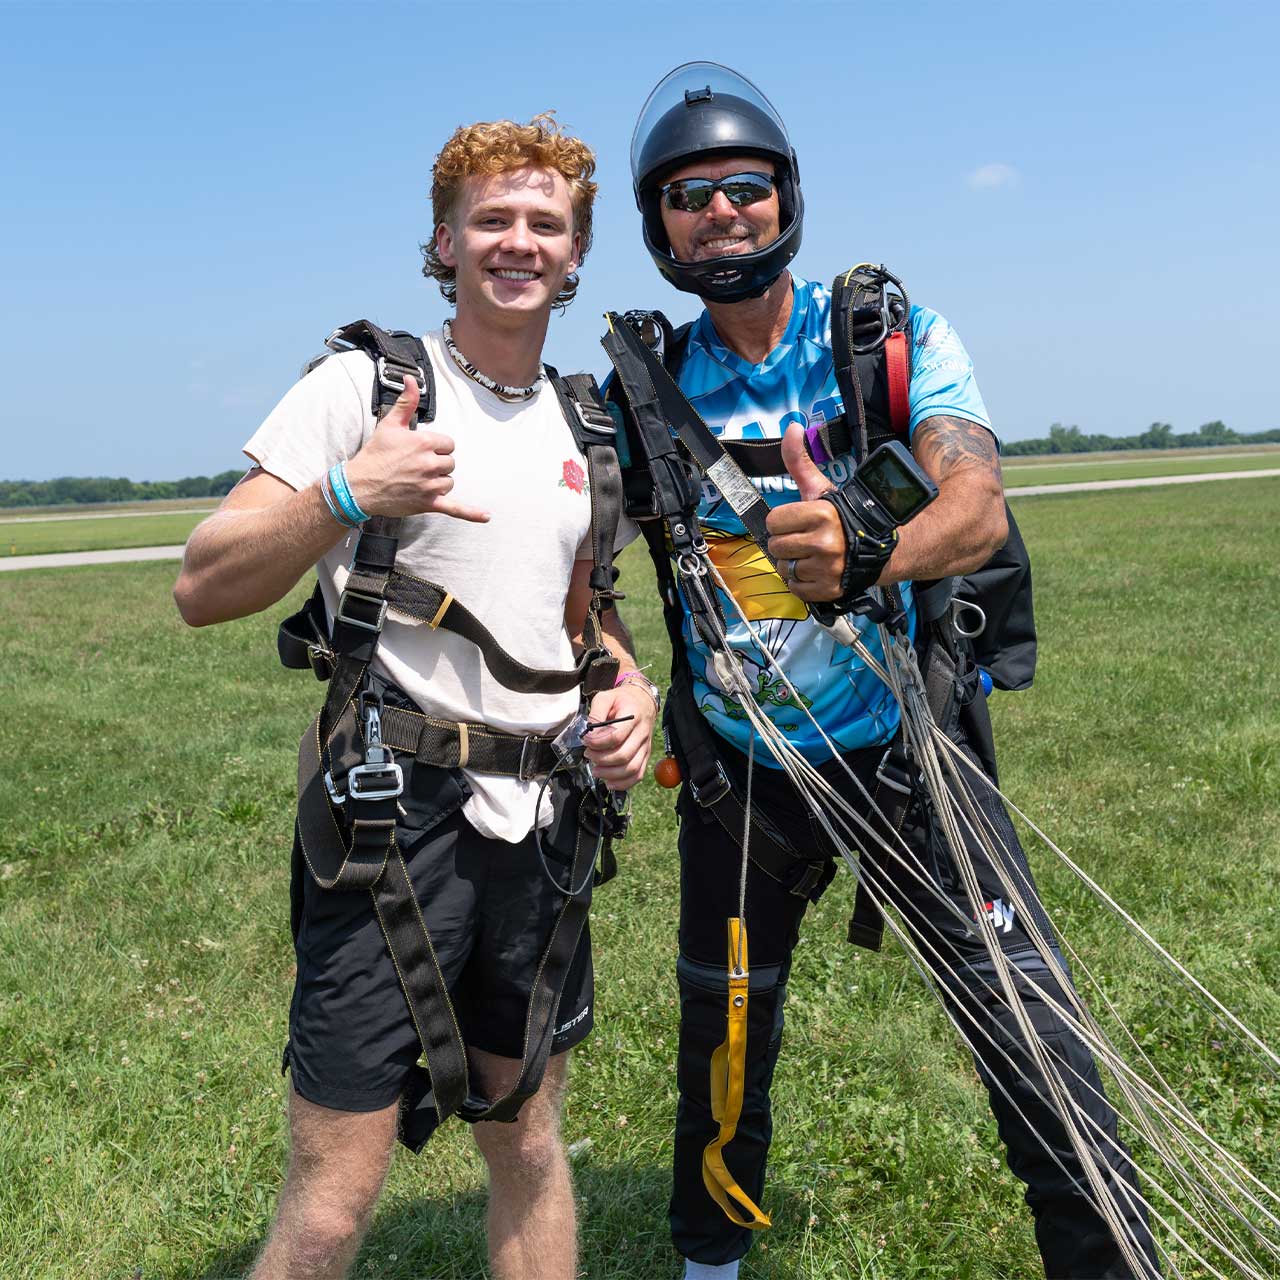 male tandem student with red hair wearing a white t-shirt posing after landing giving the hang loose sign as the tandem instructor gives a thumbs up